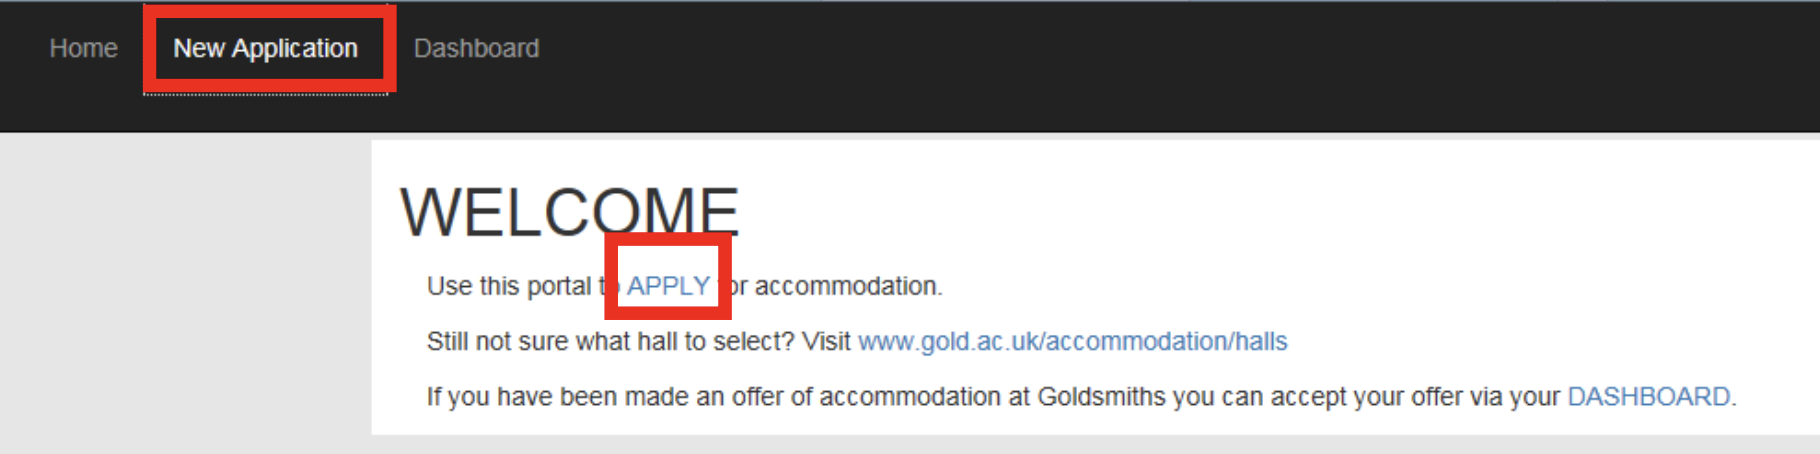 Screenshot of online accommodation application welcome webpage